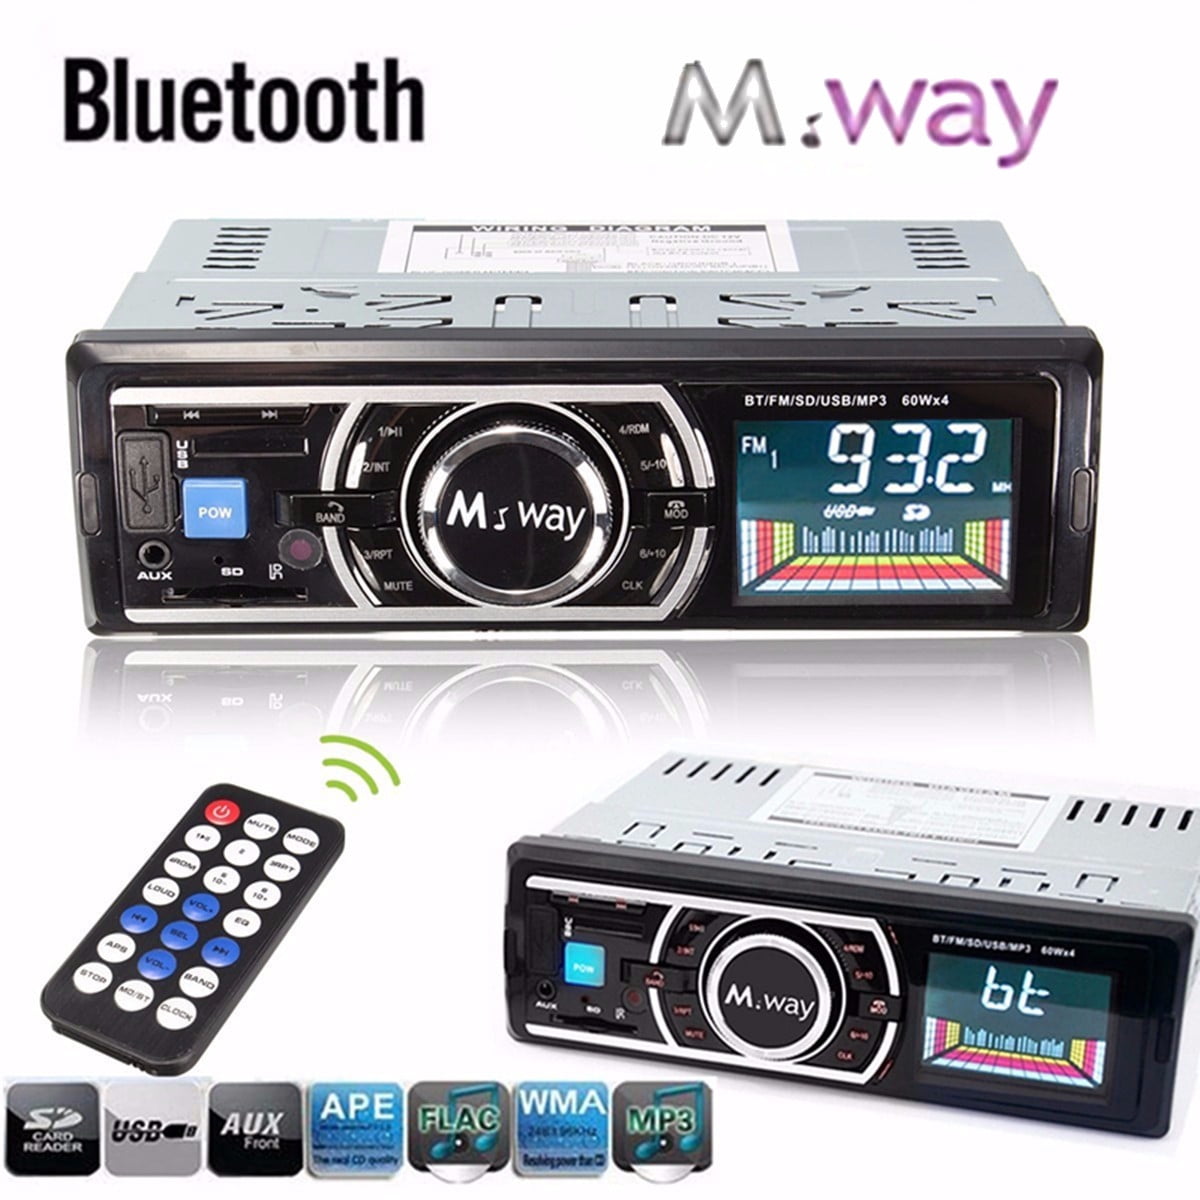 M.way LCD 60W*4 Channels h Car Stereo Audio Receiver In-Dash Car FM AM Radio Car MP3 Music Player Hand Free Calls Single Din USB/SD/AUX with Microphone Wireless Remote